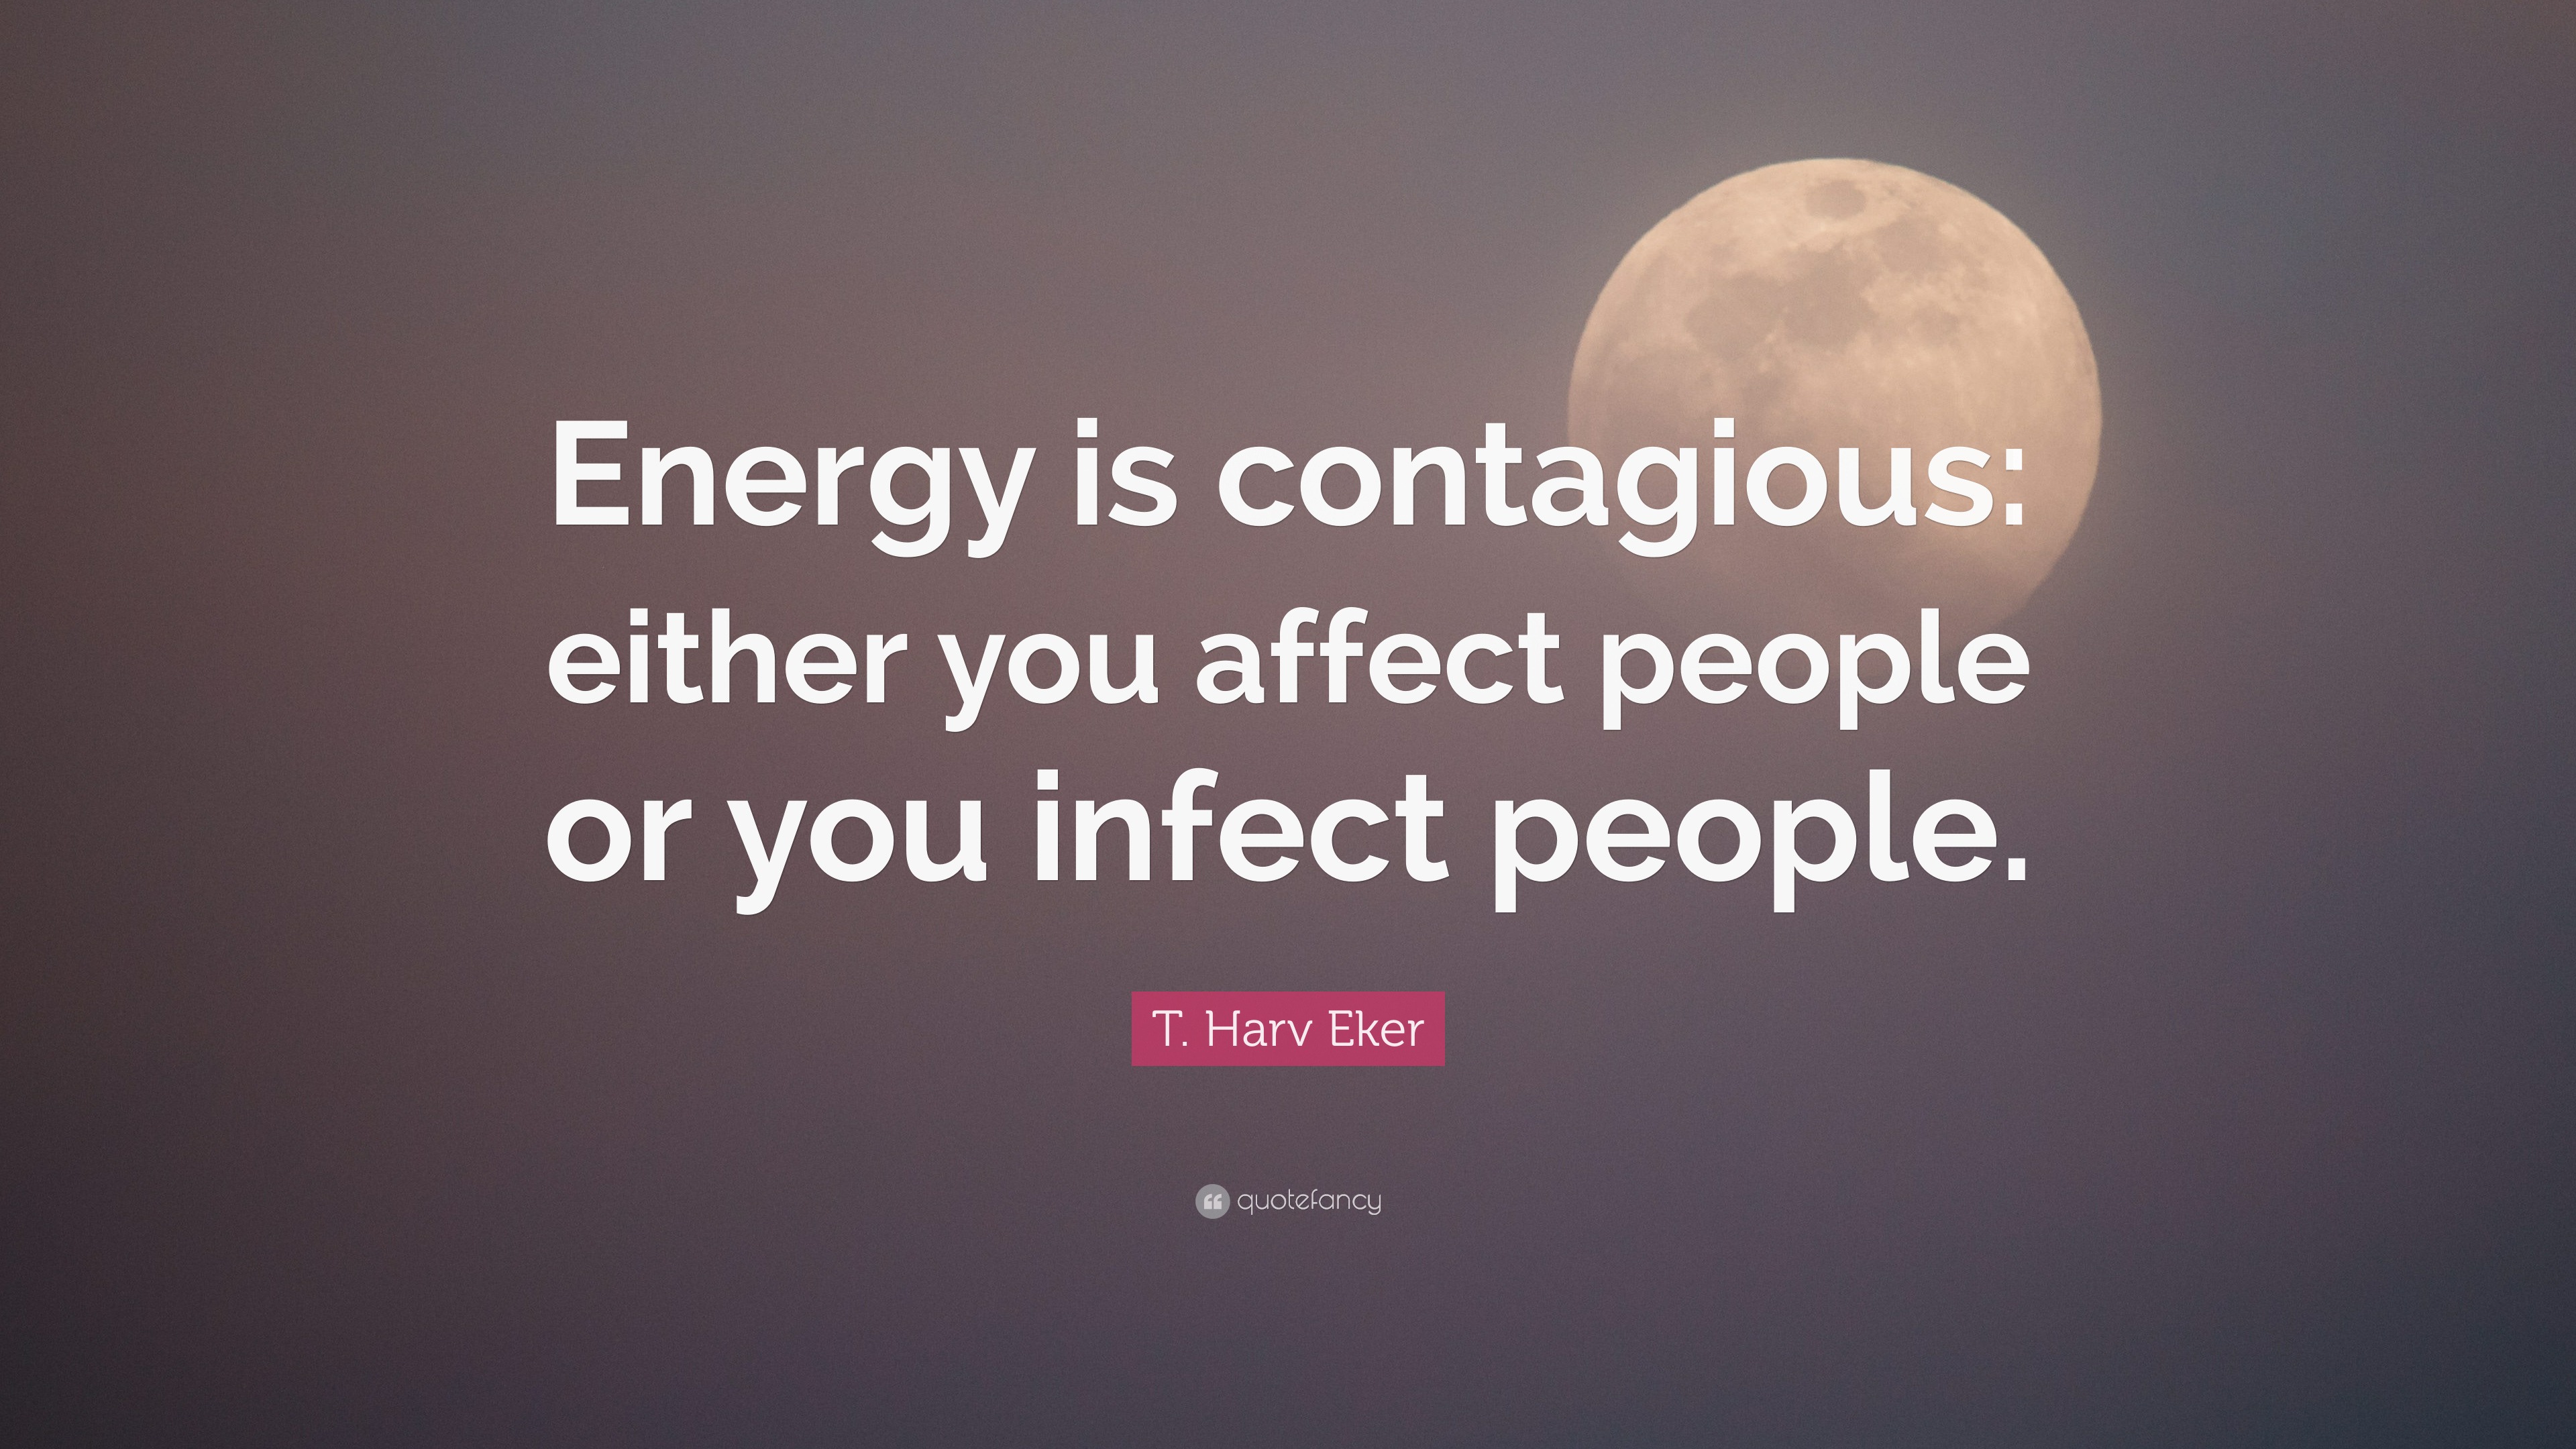 4718778 T Harv Eker Quote Energy is contagious either you affect people or